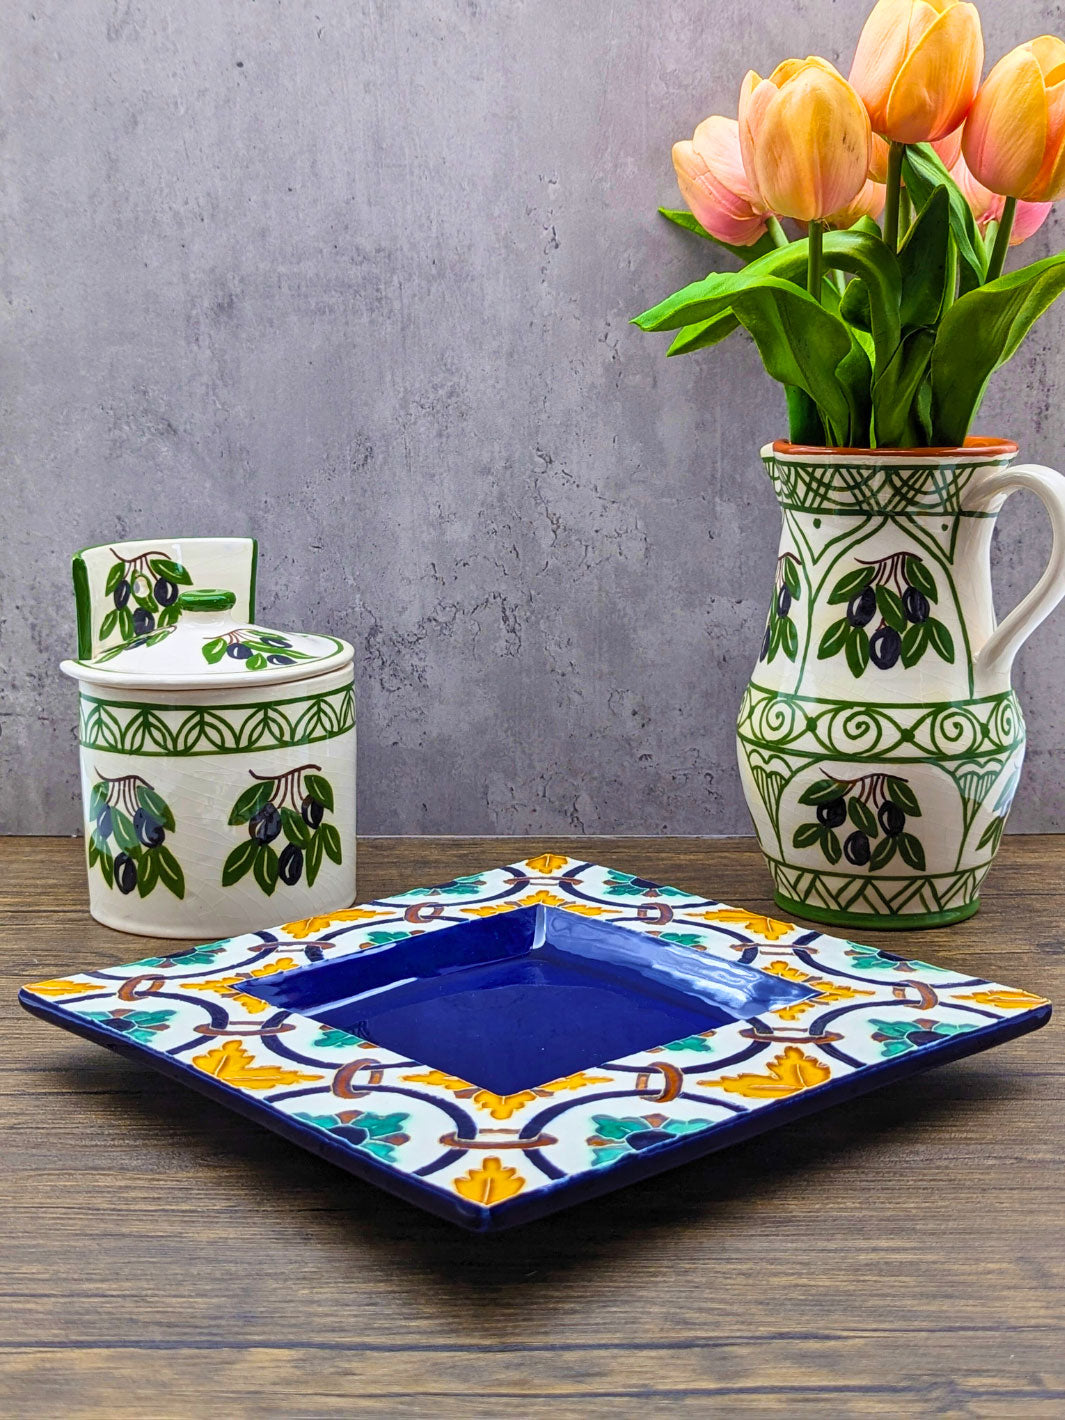 Handcrafted Portuguese Tiles Large Ceramic Square Plate